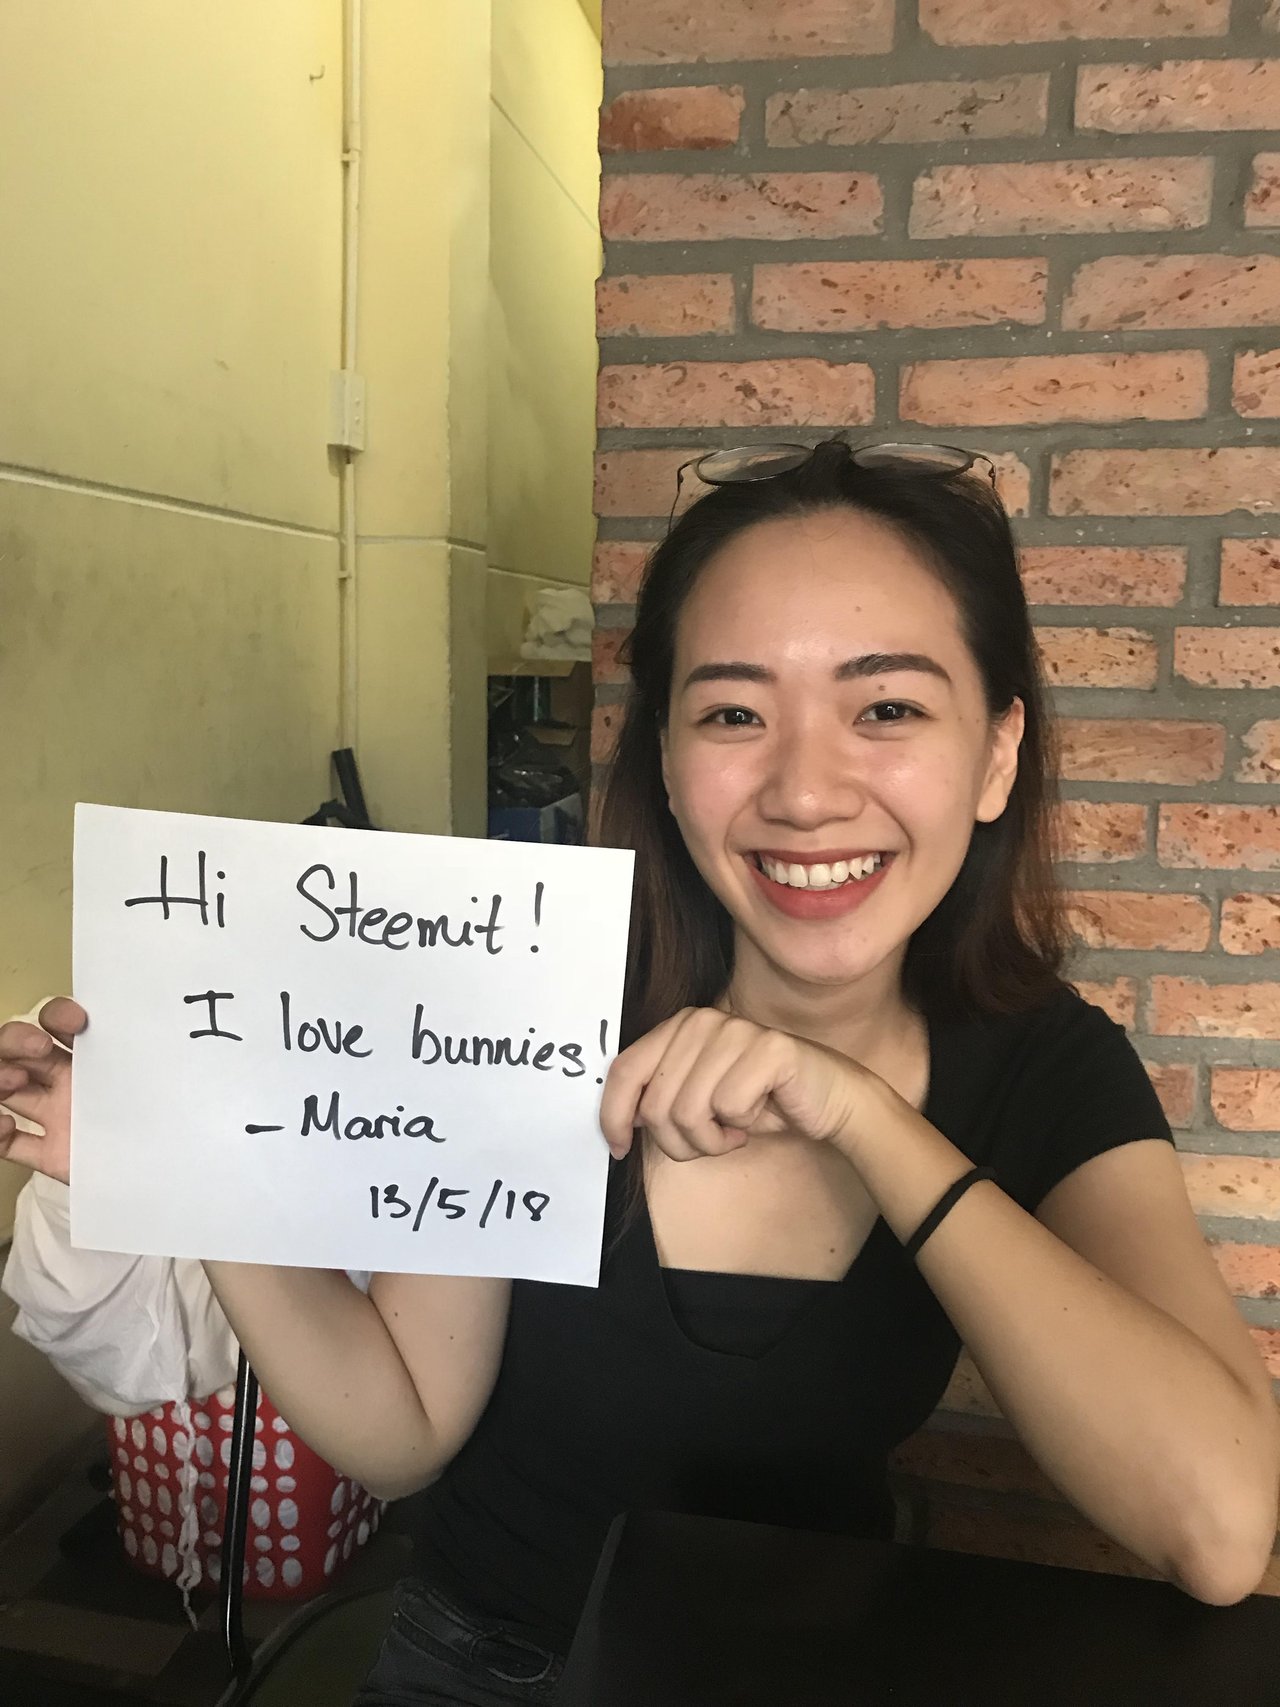 STEEMIT - Why are you so obsessed with me?! — Steemit